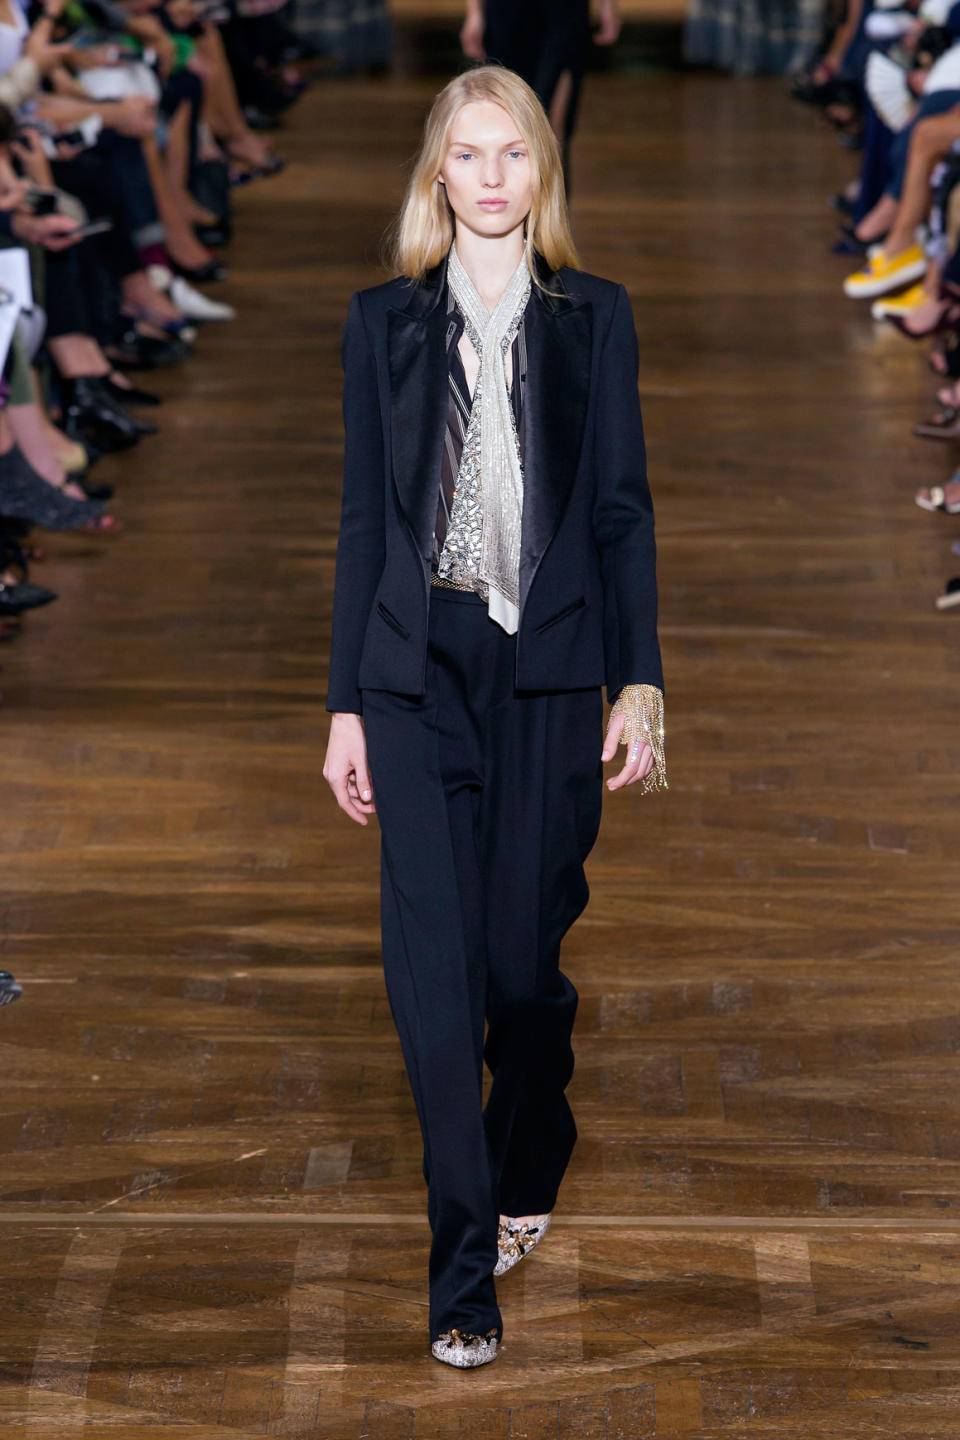 <p>From Paris Fashion Week to Bridal Fashion Week, the runways often share similar trends. For spring 2017, one of them was undeniably the pantsuit, which made it to Lanvin (in oyster charmeuse), <span>Chloé (in minimalist black and white) and Givenchy (with oversized pockets). The bridal market also introduced tailored white tuxedo suits in lieu of the traditional wedding gown. Looks like the industry is finally catching on.</span></p> <h4>Imaxtree</h4>